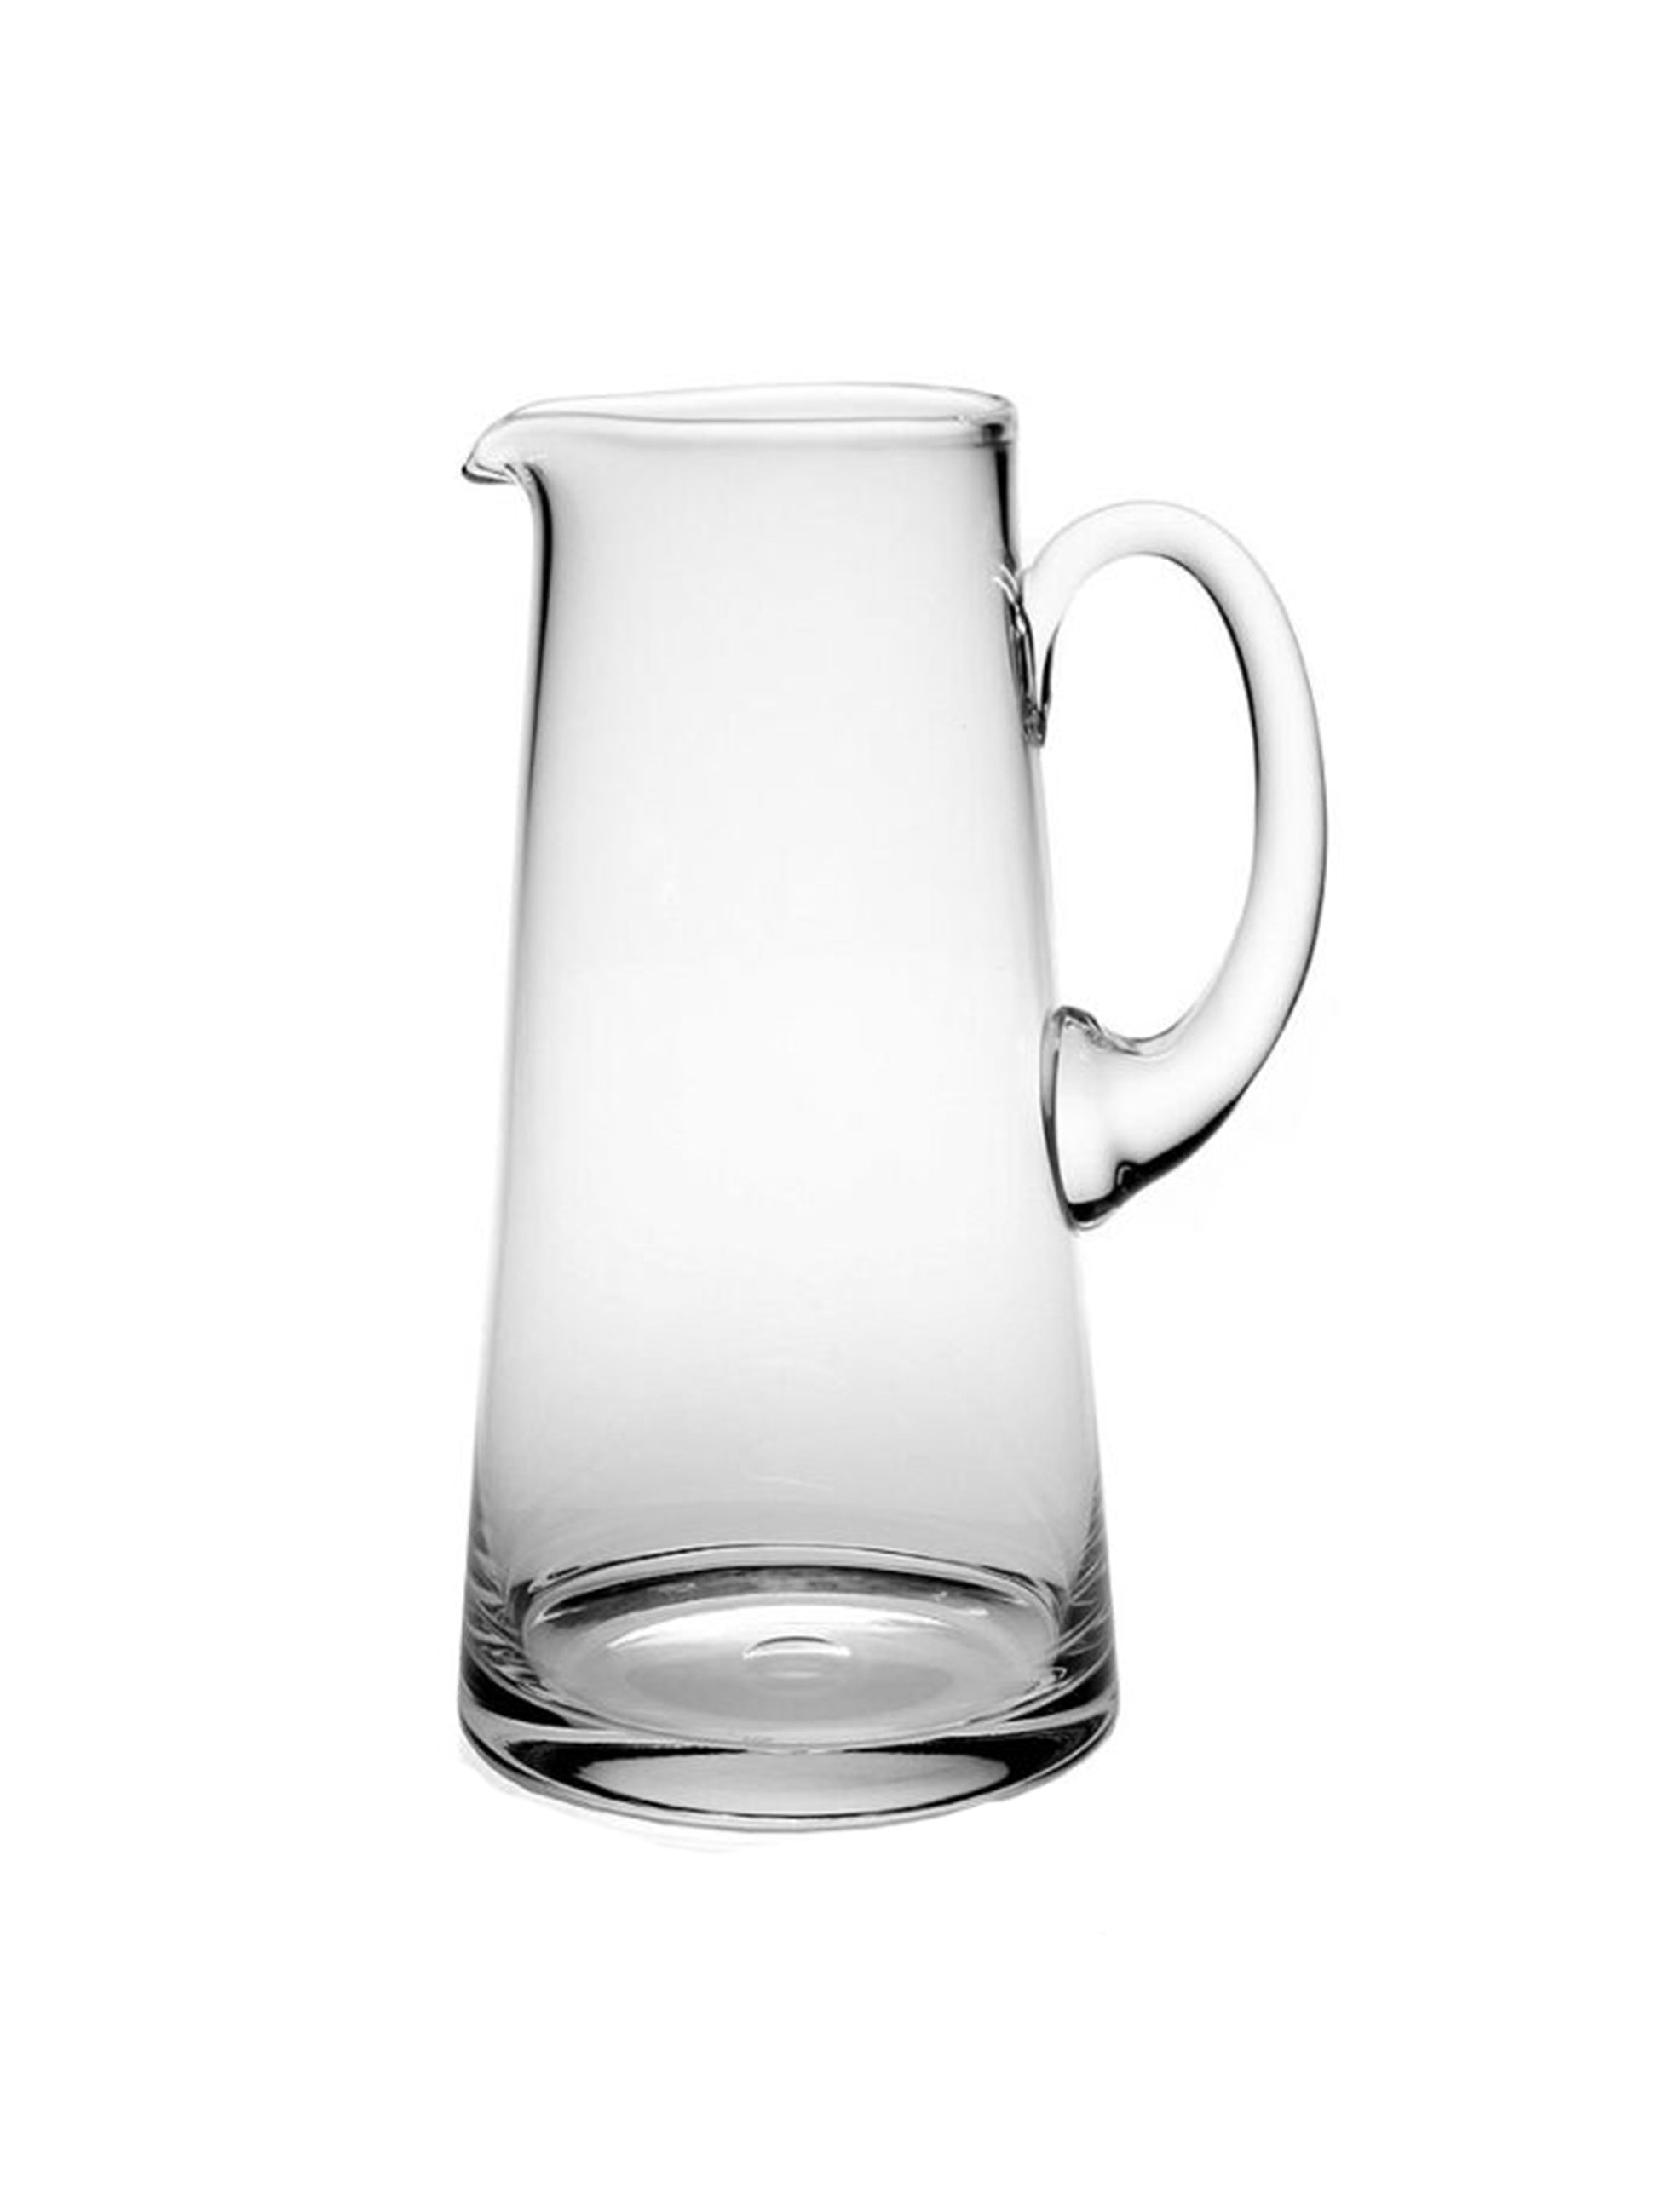 William Yeoward Crystal Classic Pitcher 4 Pint Weston Table